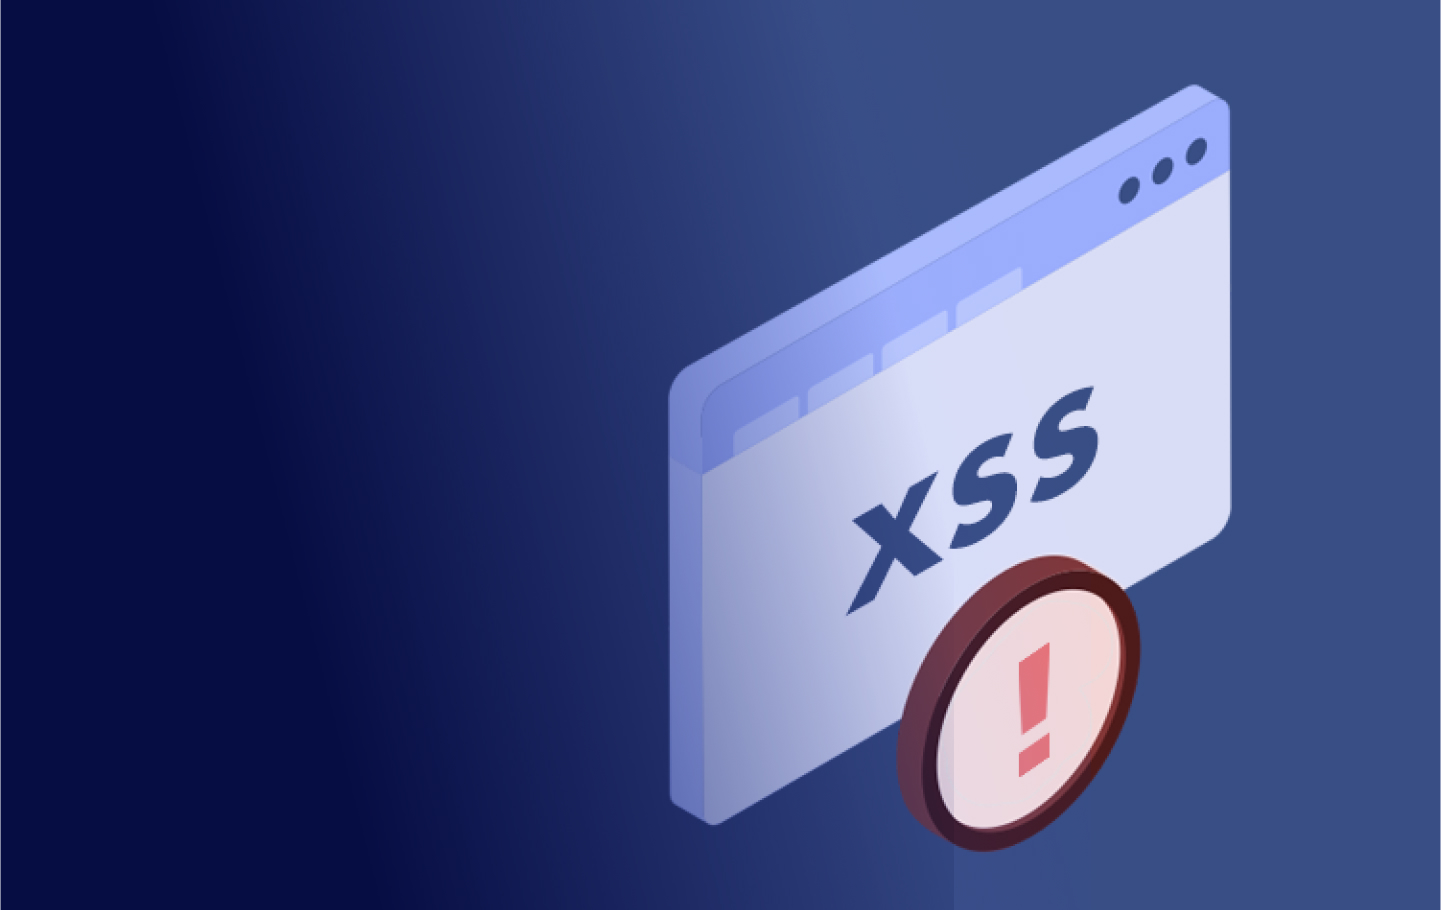 Getting started with XSS: Cross-Site Scripting Attacks